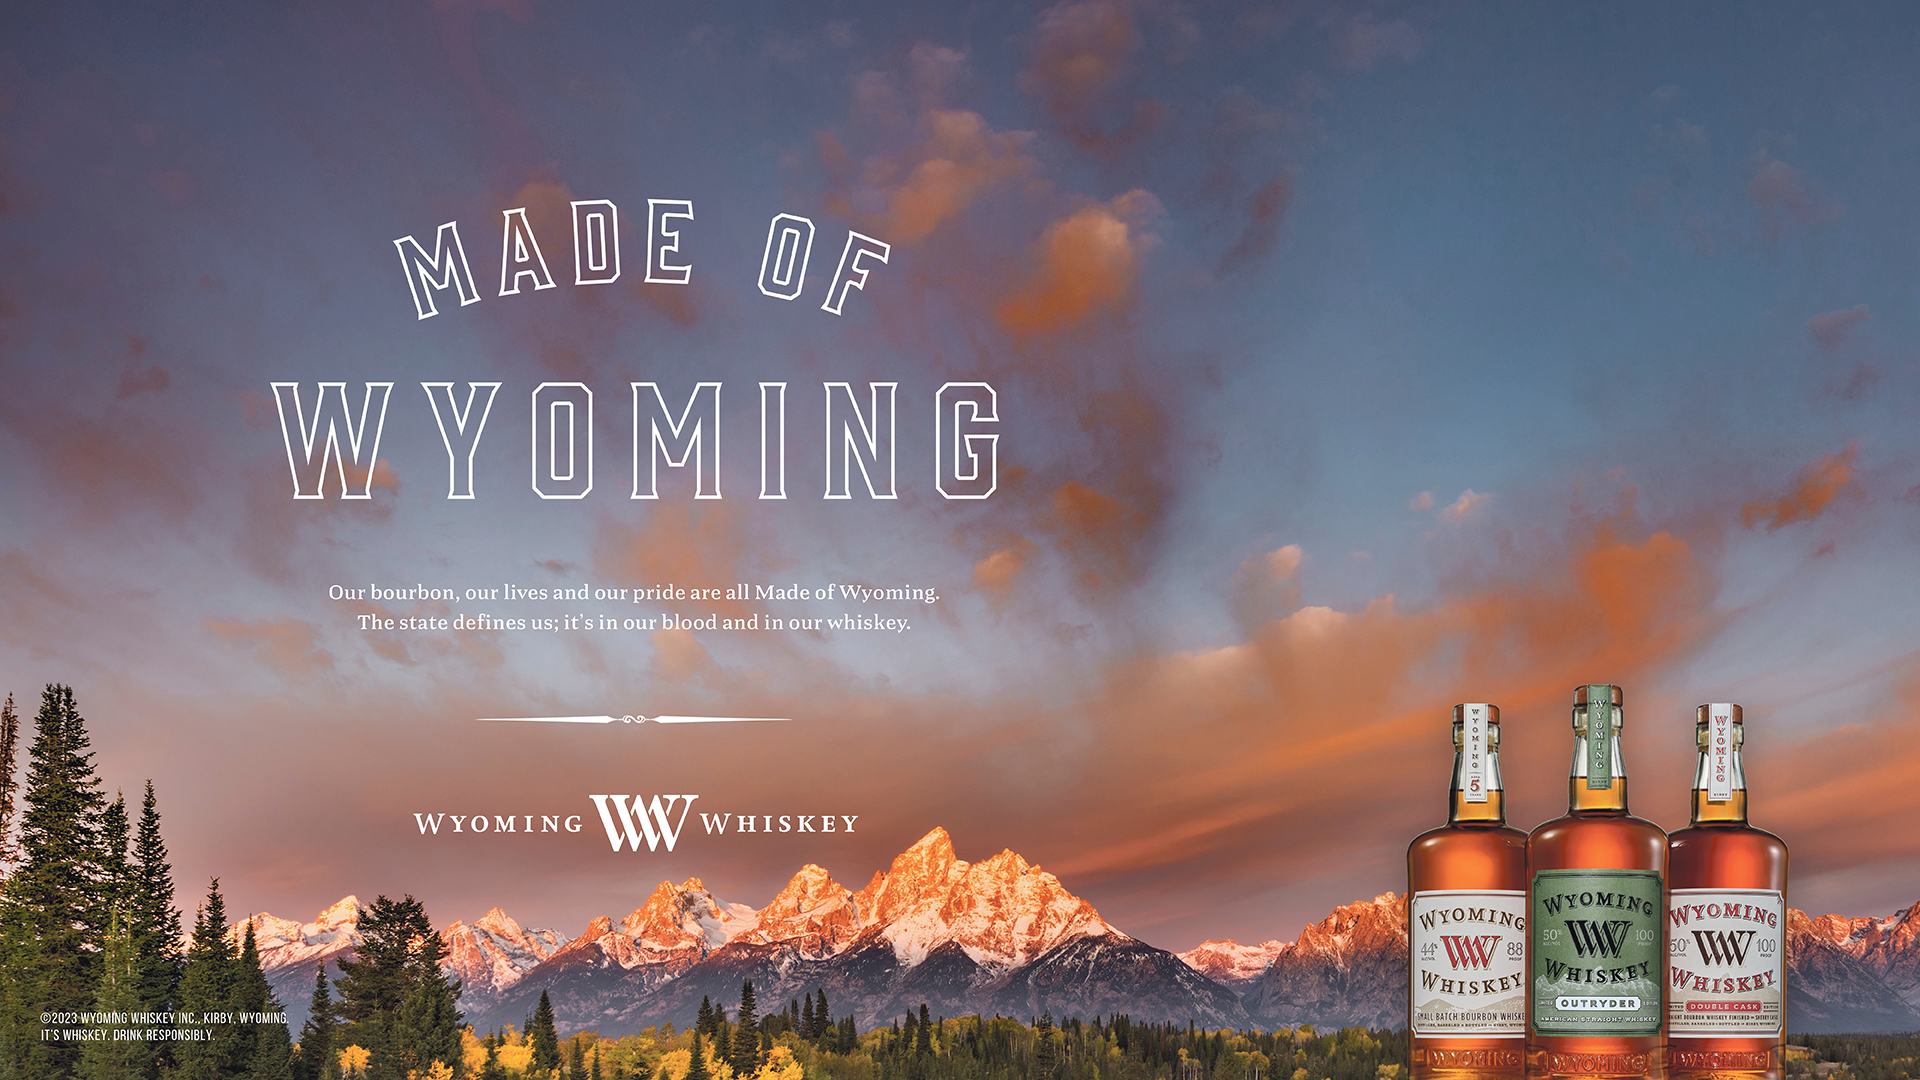 New “Made Of Wyoming” Campaign Highlights Wyoming Whiskey